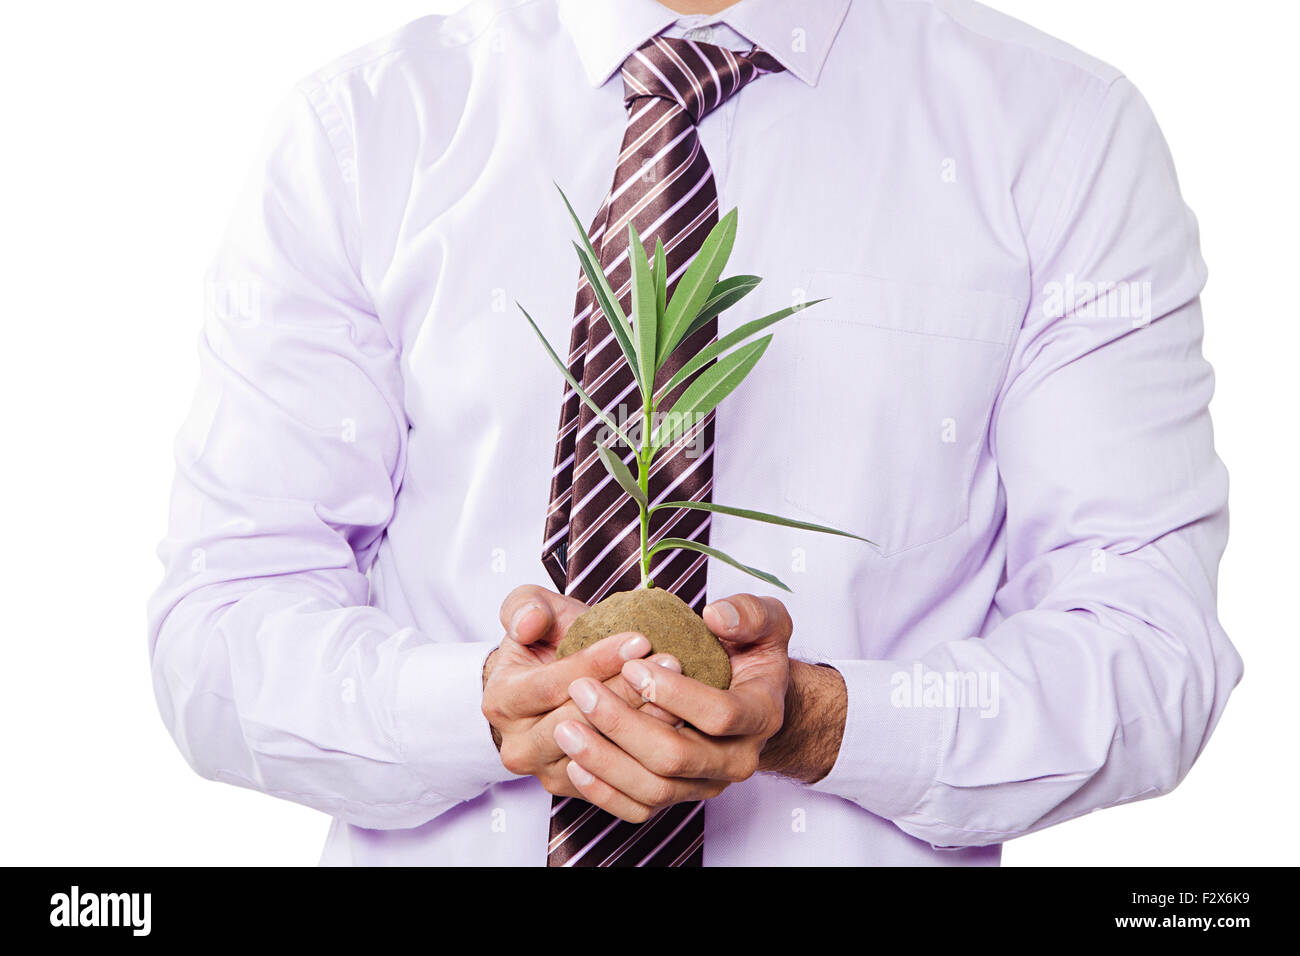 1 indian Business man Safety Plant-life Stock Photo